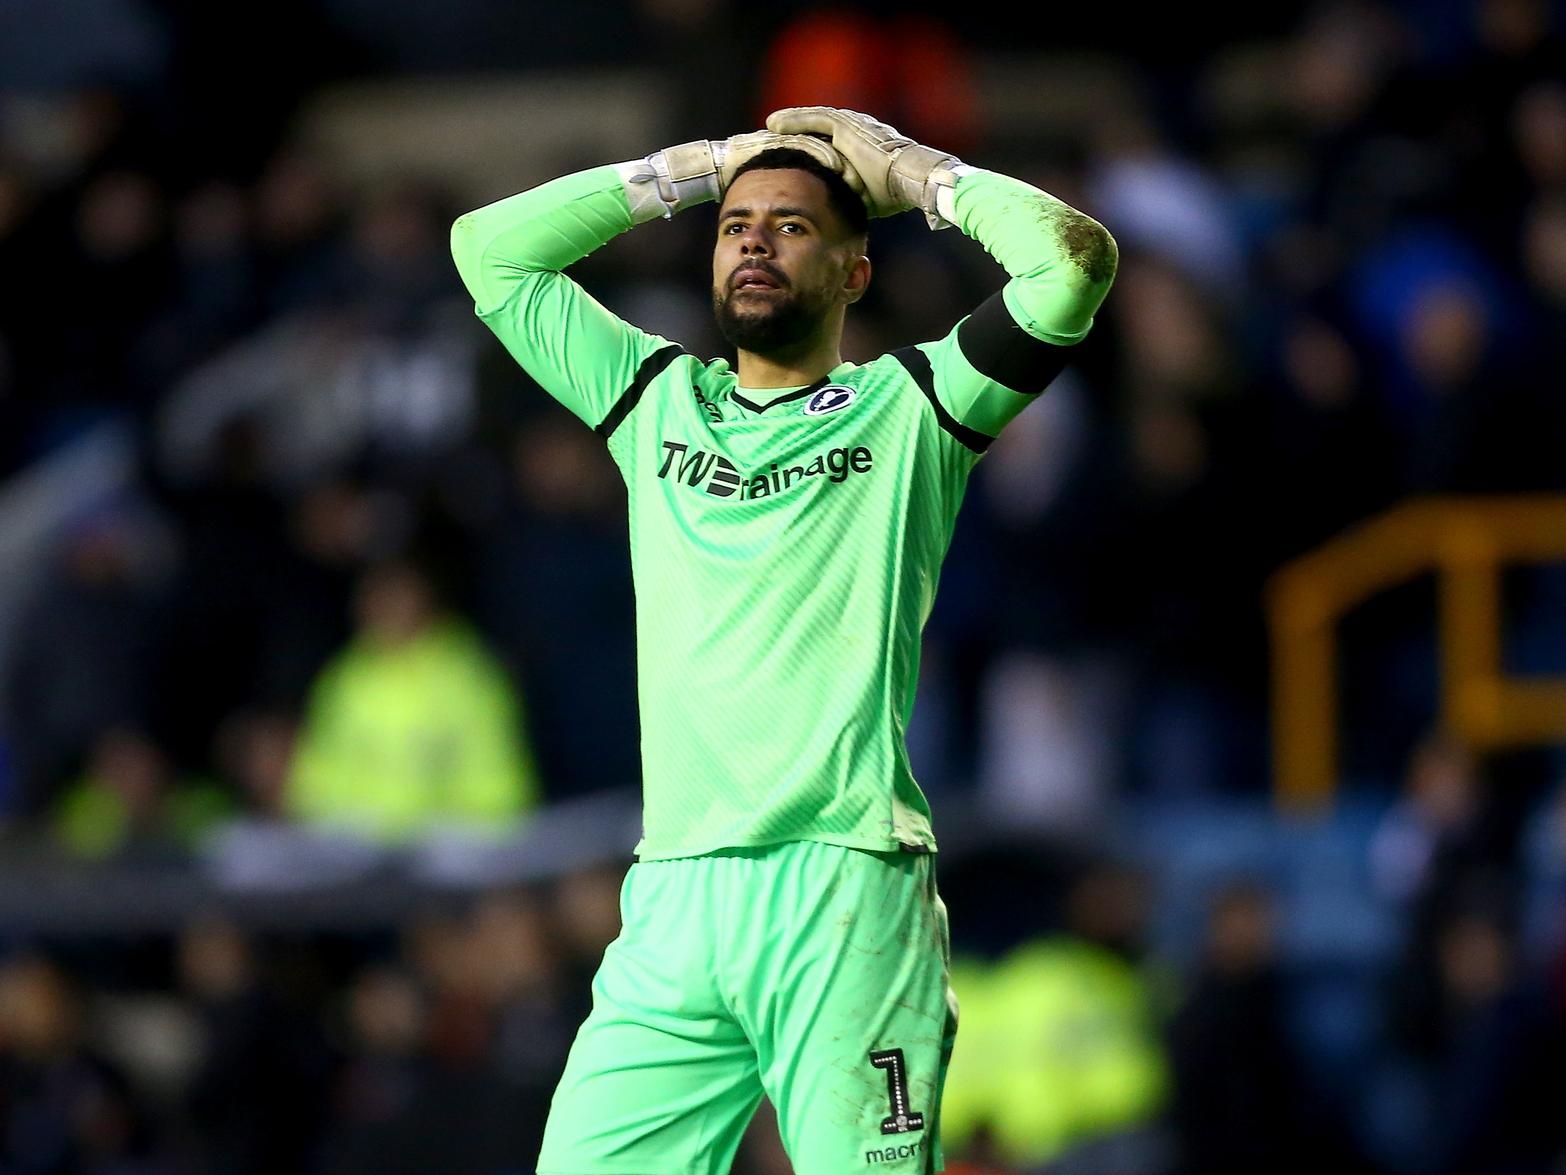 Goalkeeper Jordan Archer, who was released by Millwall at the end of last season, is said to be training with Aston Villa, as the Scotland international looks to find himself a new club. (Daily Mail)